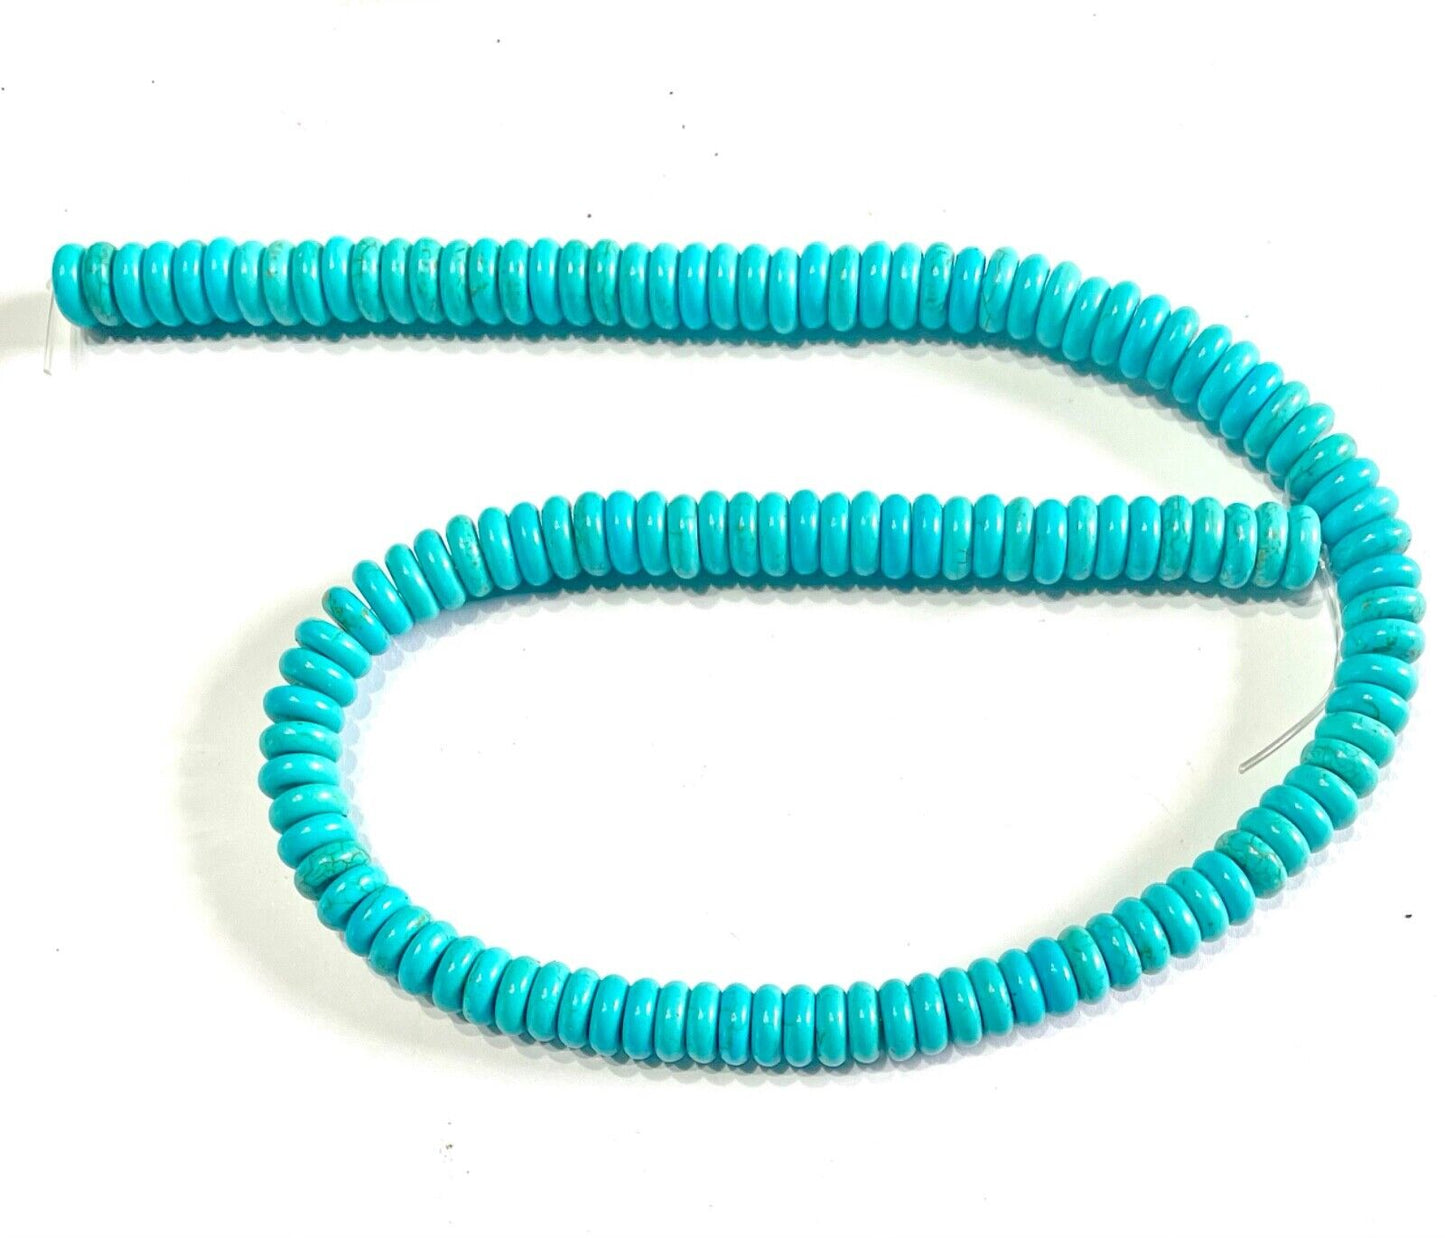 1 strand Rondelle Howlite Turquoise 8mm x3mm Beads (100 pcs)